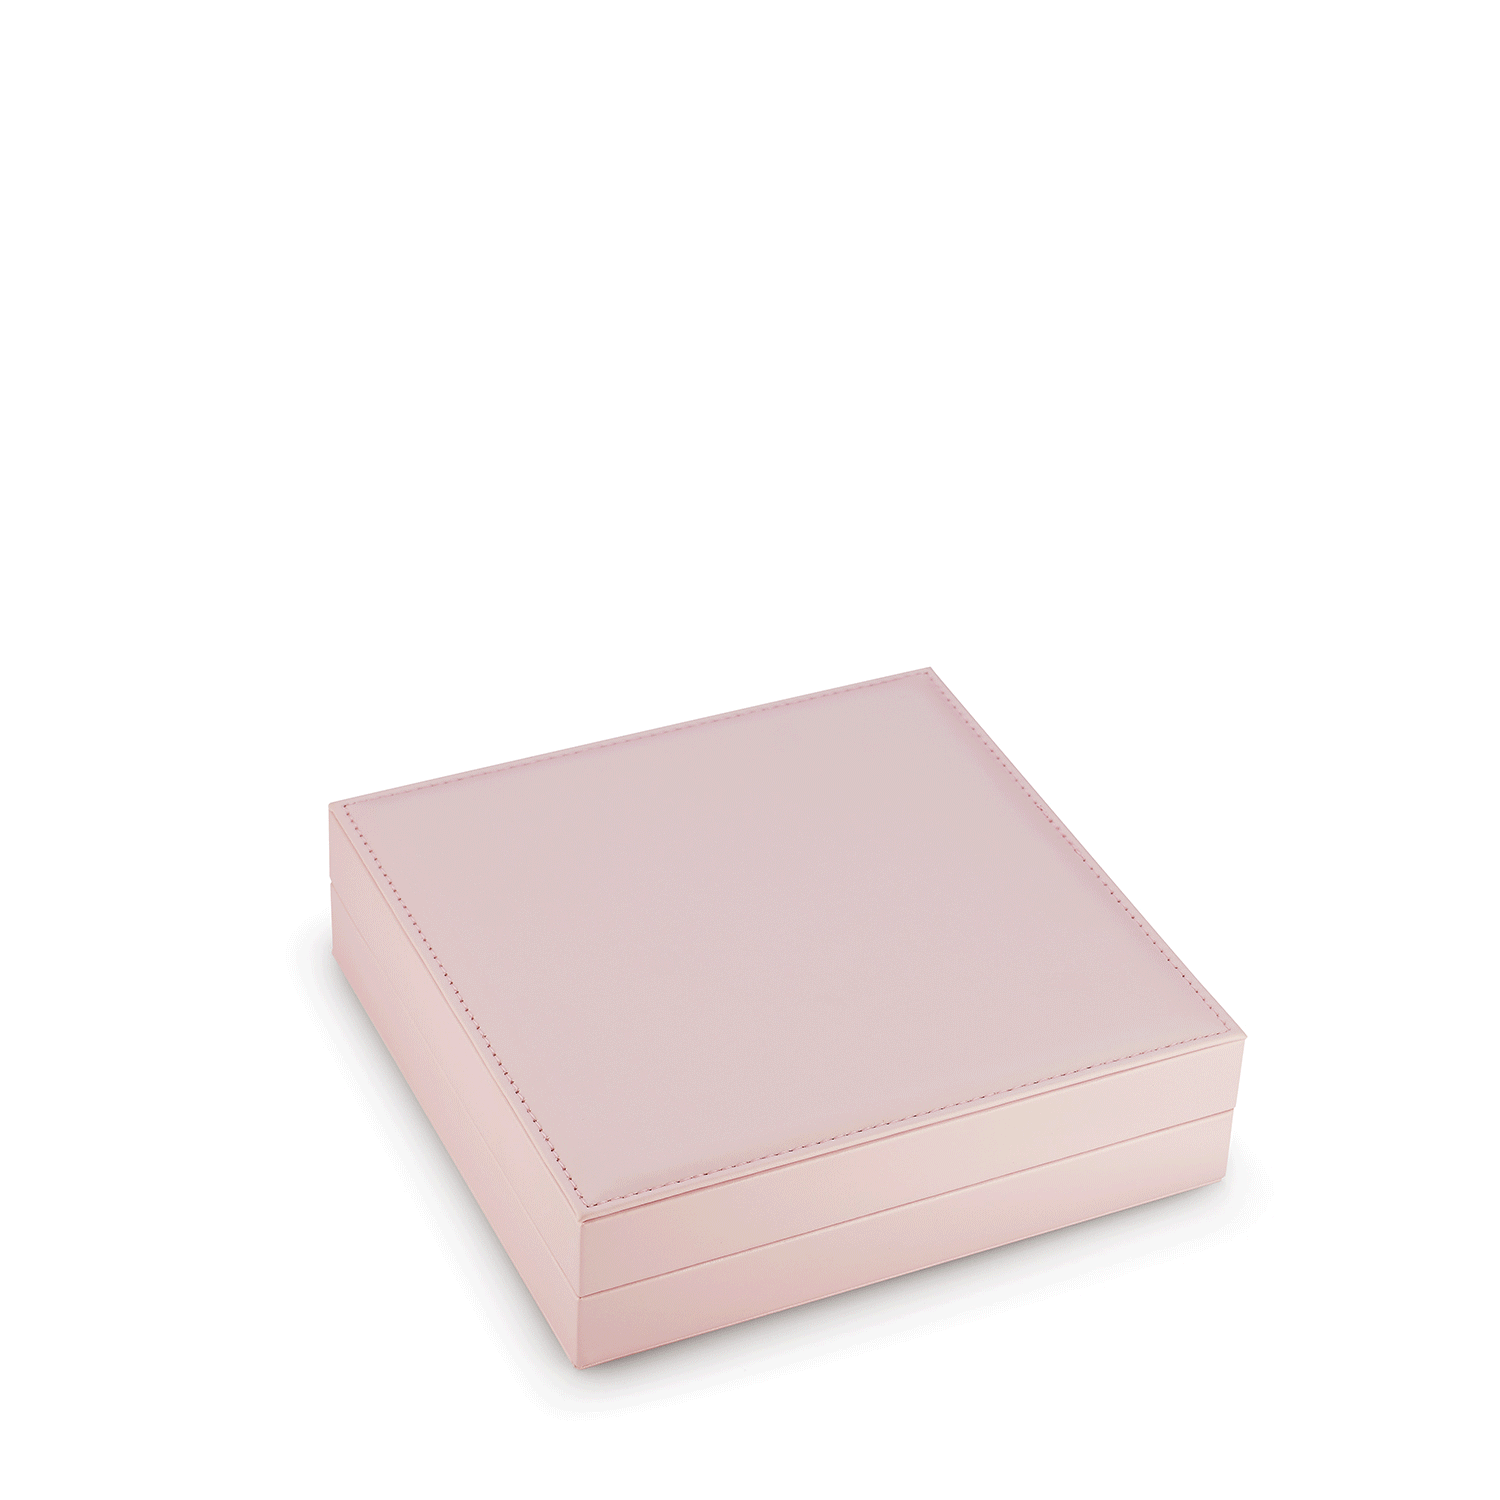 Signature Jewelry Box in the color pink opening and closing